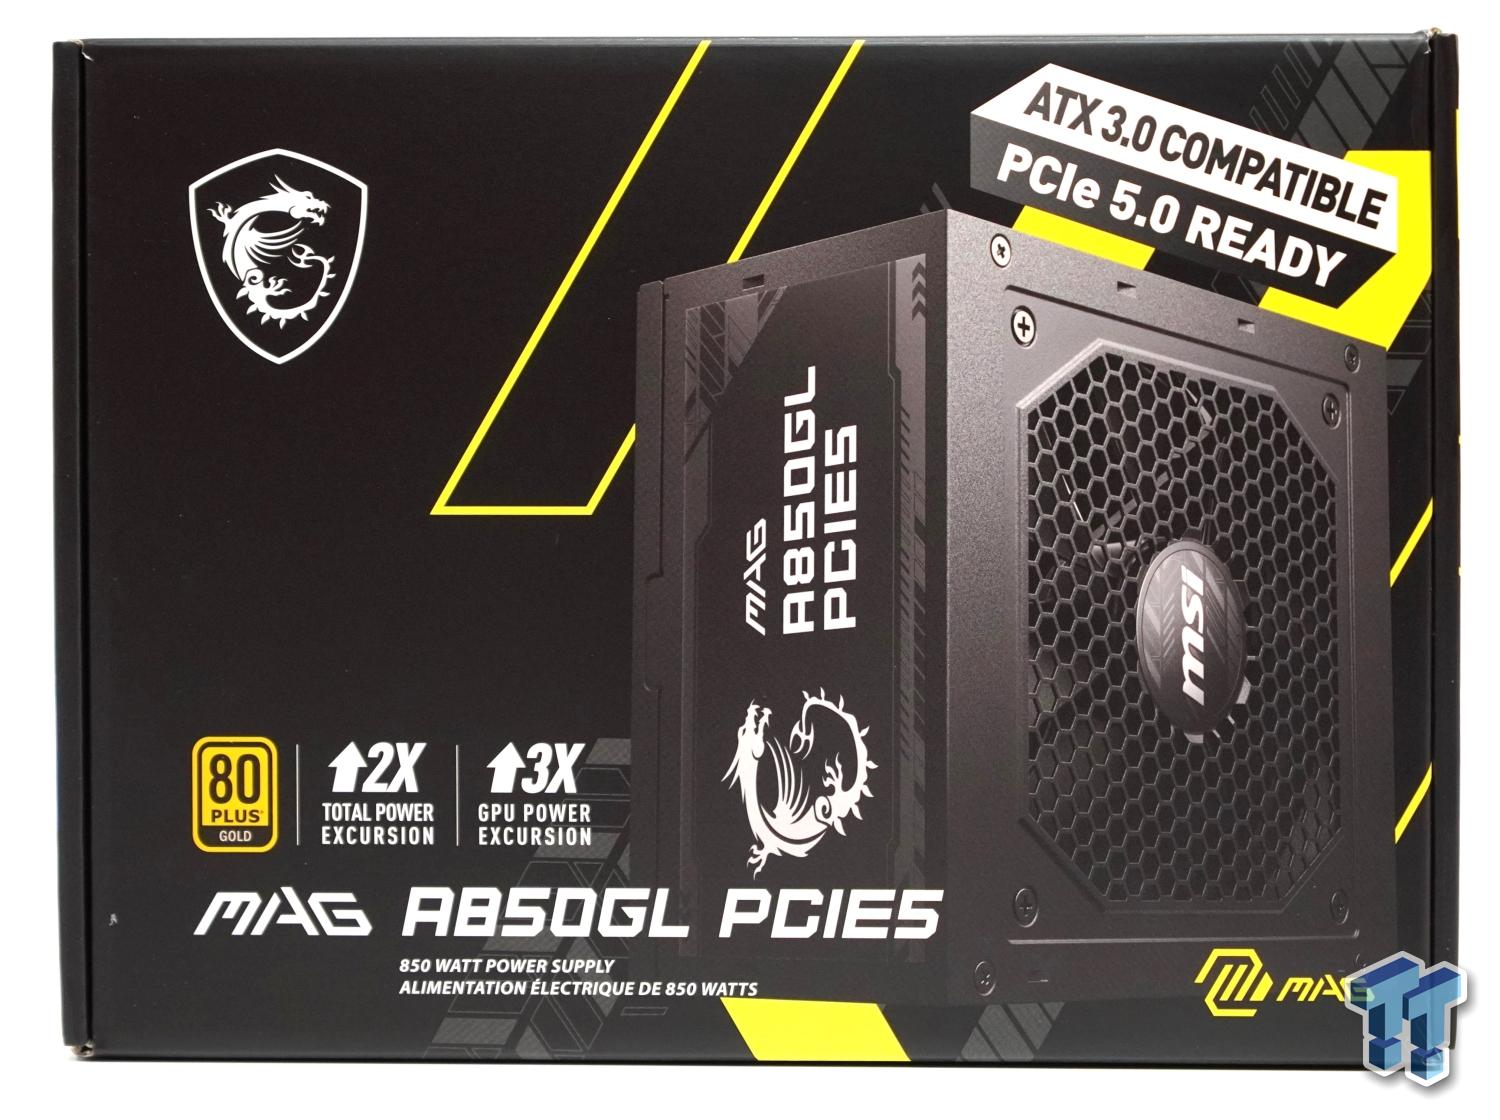 MAG A850GL PCIE5, Power Supply